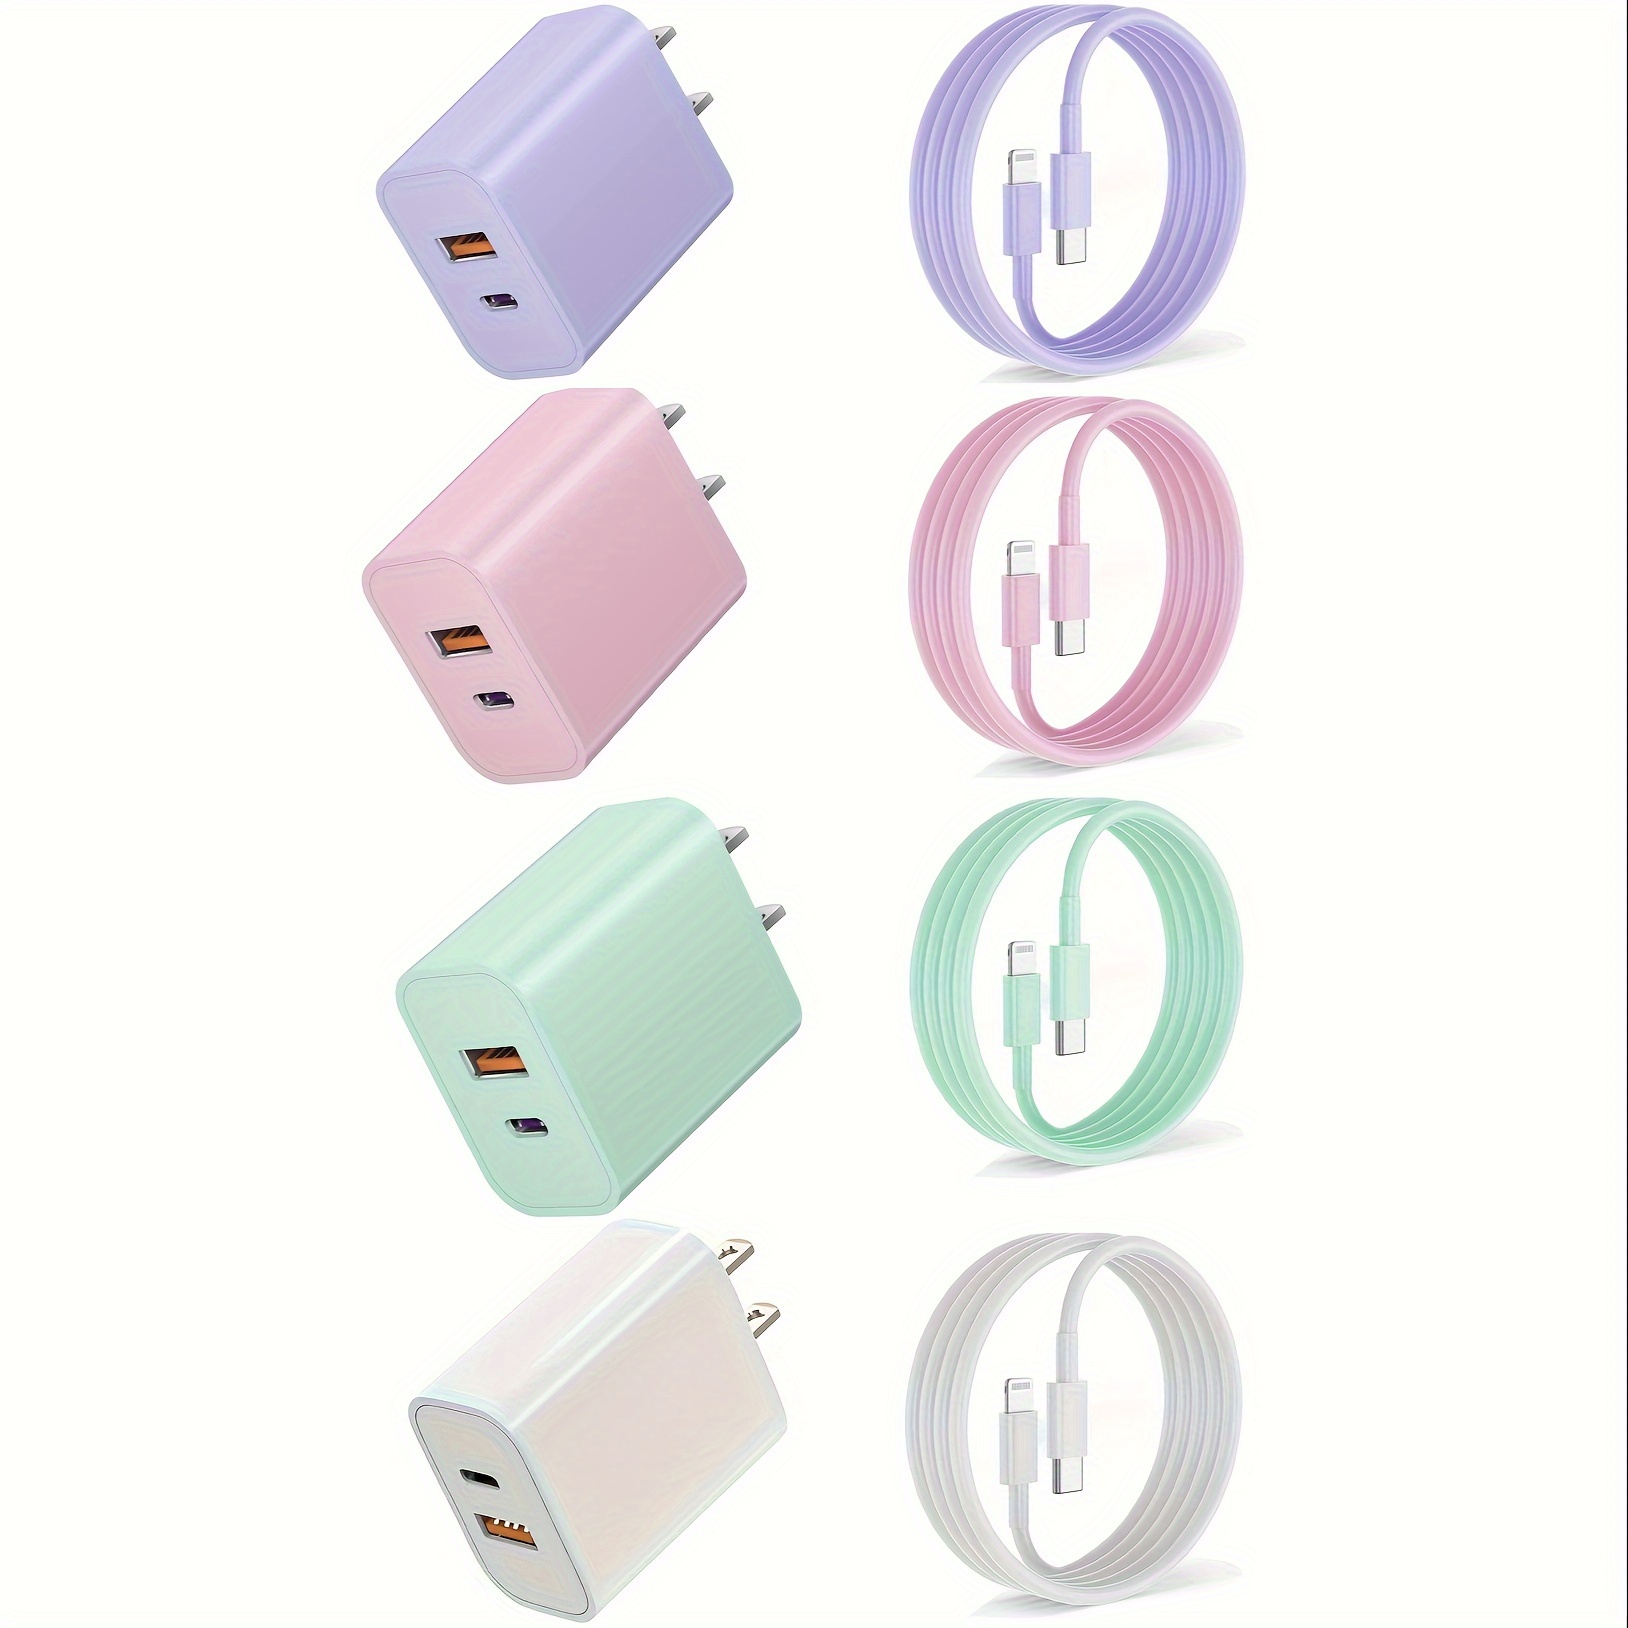 

Suitable For Quick Charging Of Iphone Charger, Pd 20w Double-port Wall Charger Block, With 6ft C-type To Lightning Quick Charging Data Sync Cable, Compatible With Iphone 14131211pro Max X S Xr X 8ipad